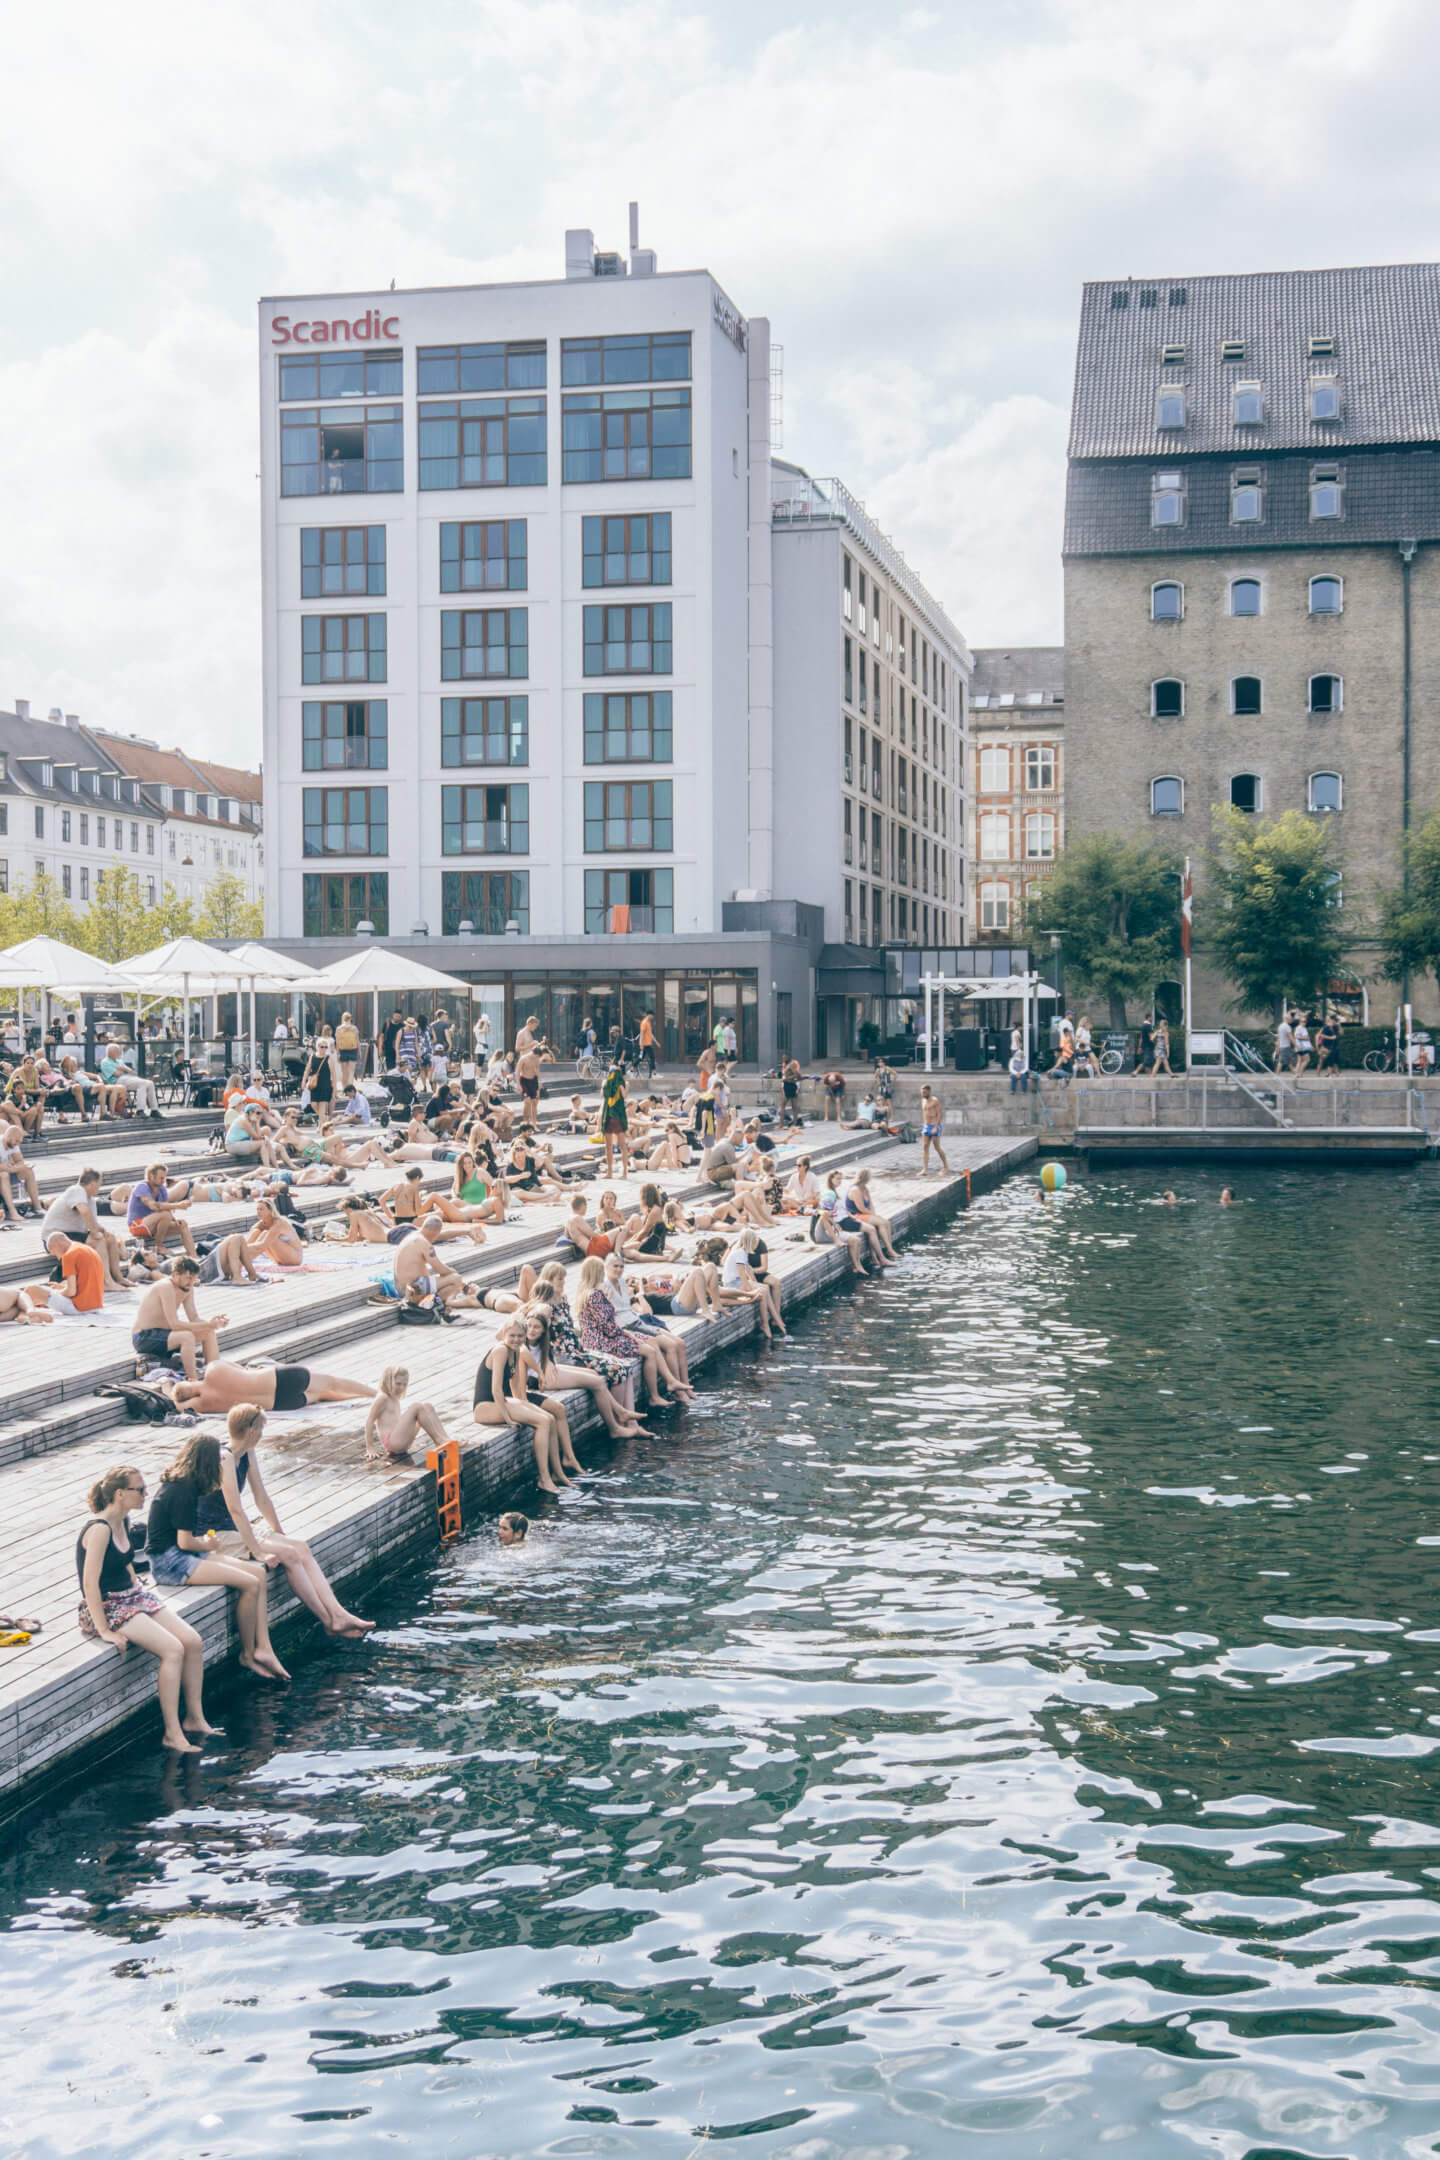 A group of people sitting with their feet dangling in the water of a Copenhagen canal during the heat of the summer